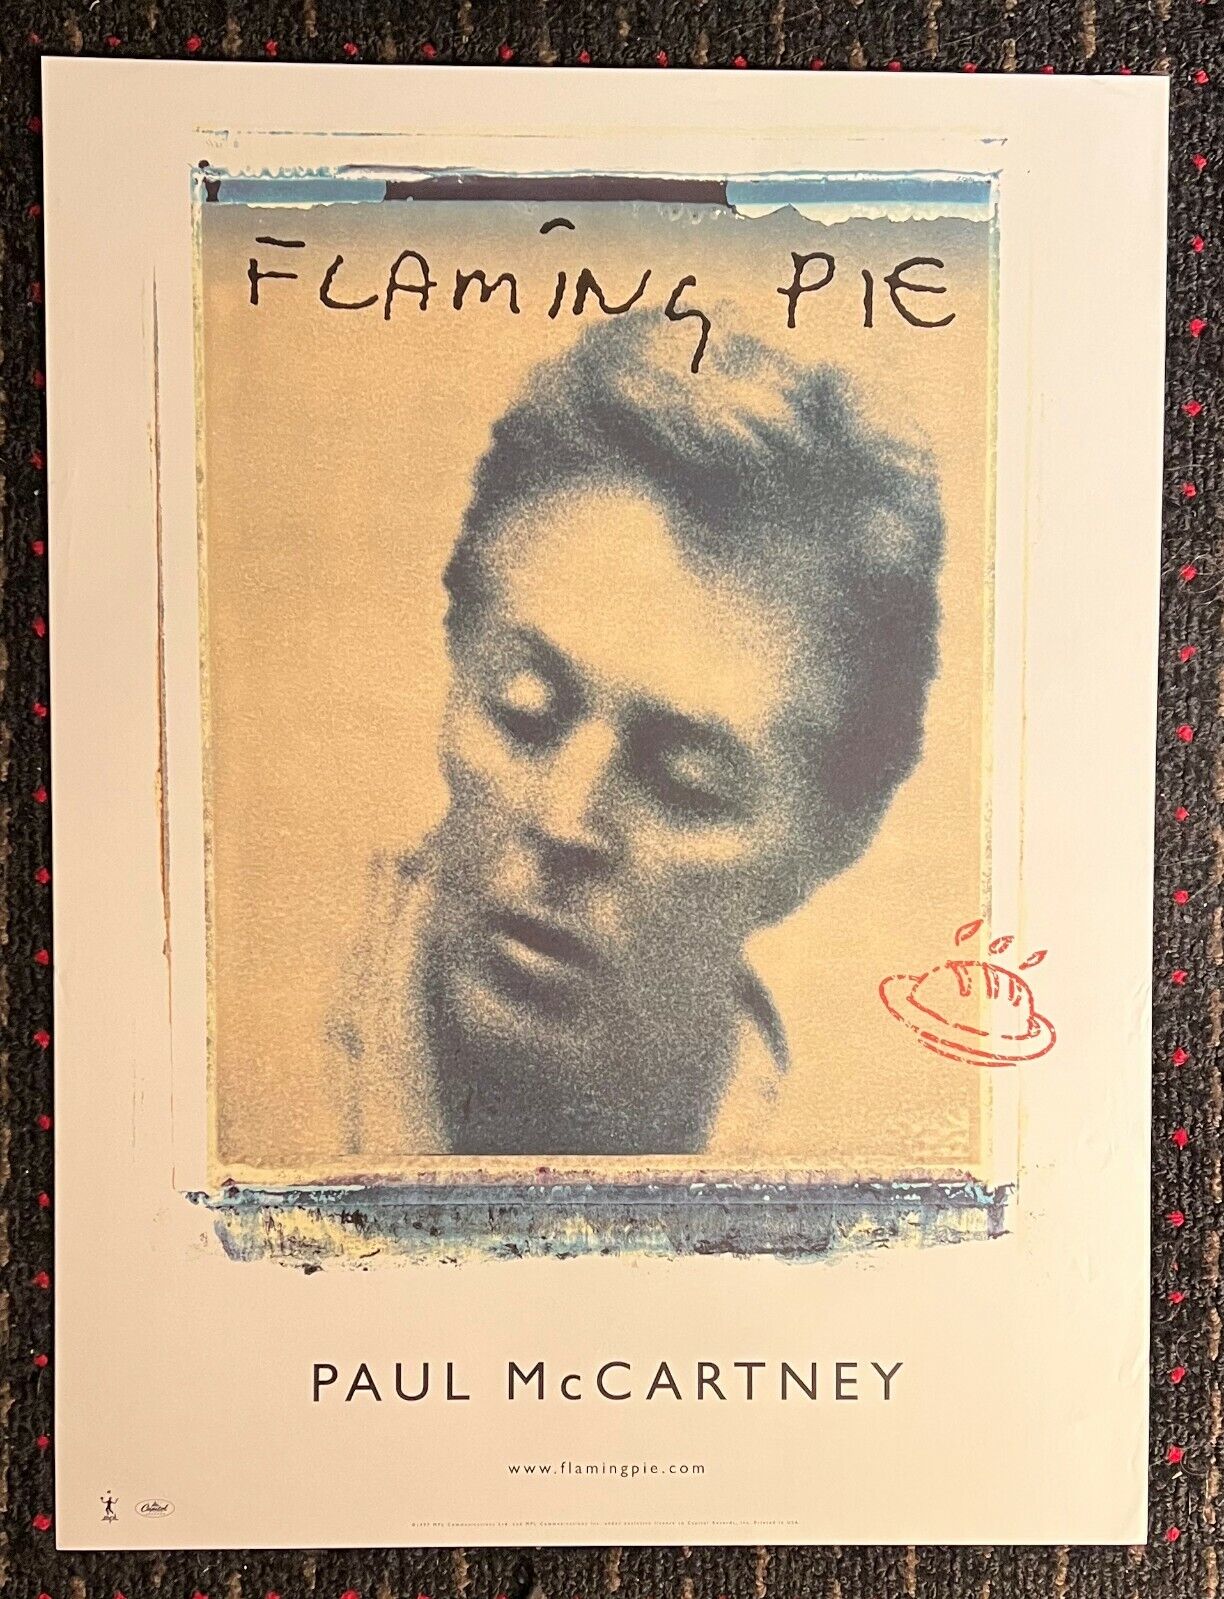 Paul McCartney Flaming Pie 18x24 record store promo poster CAPIT